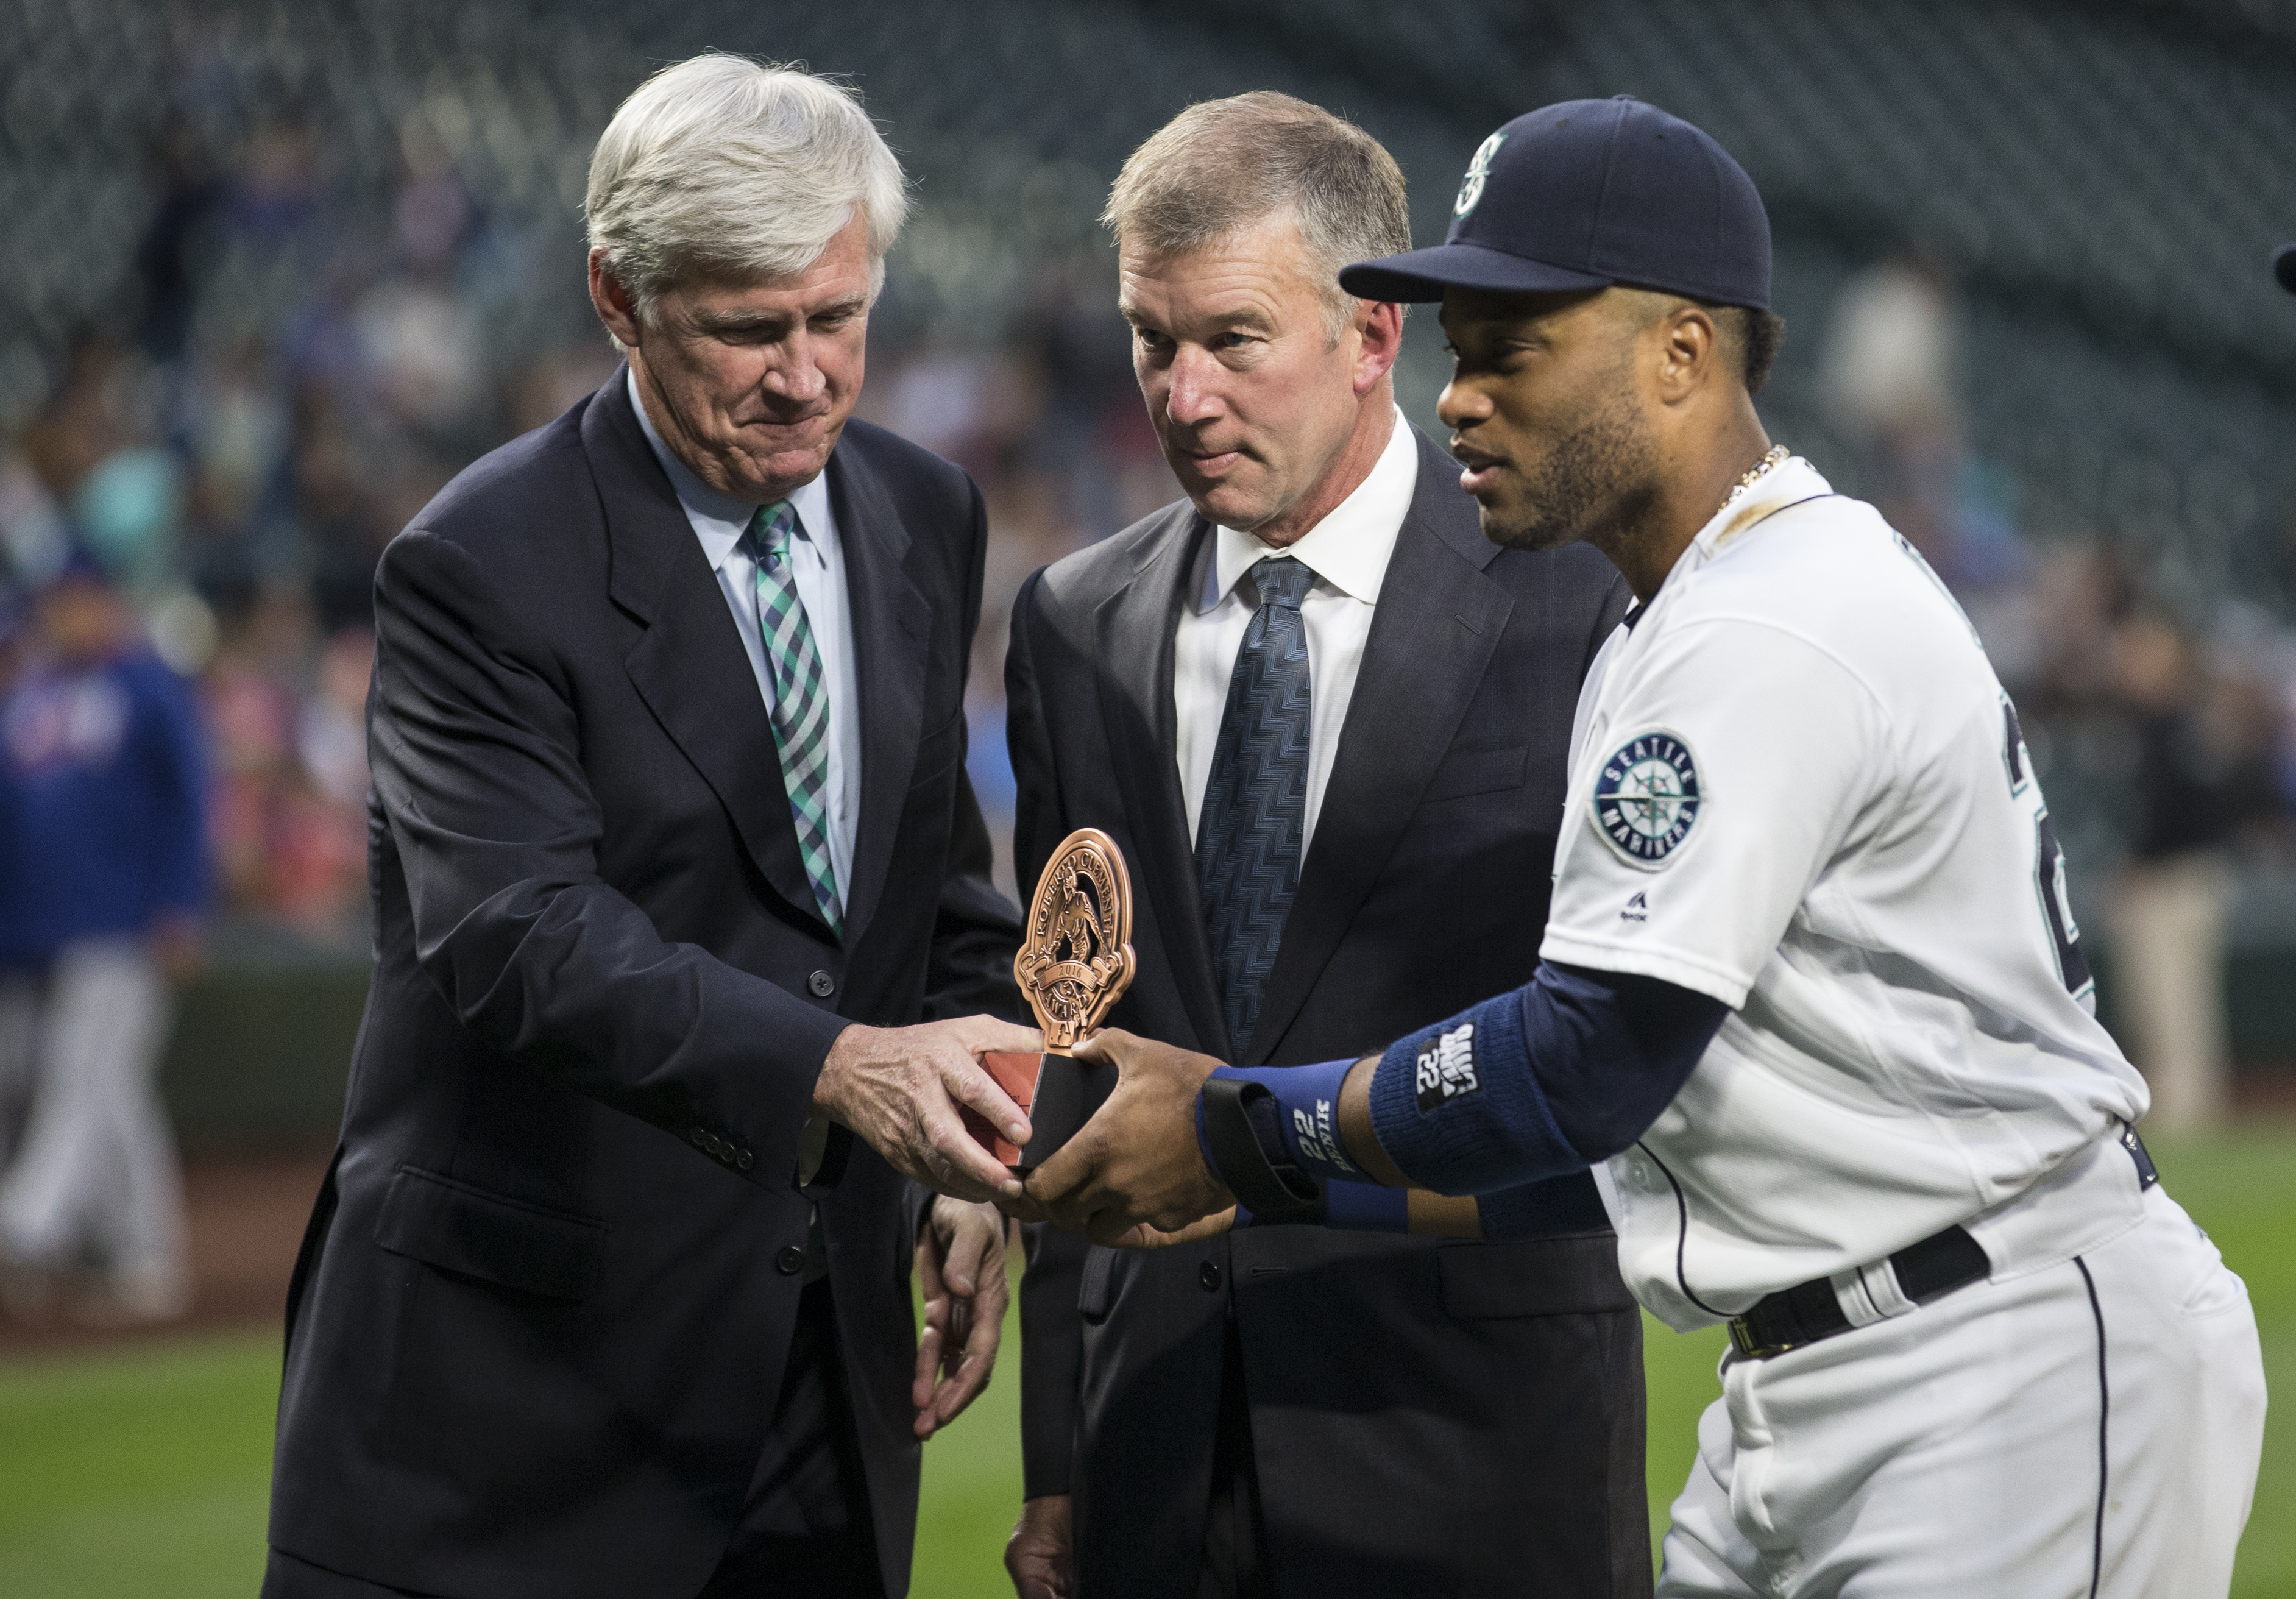 Former Mariners CEO Kevin Mather with owner John Stanton and Robinson Cano